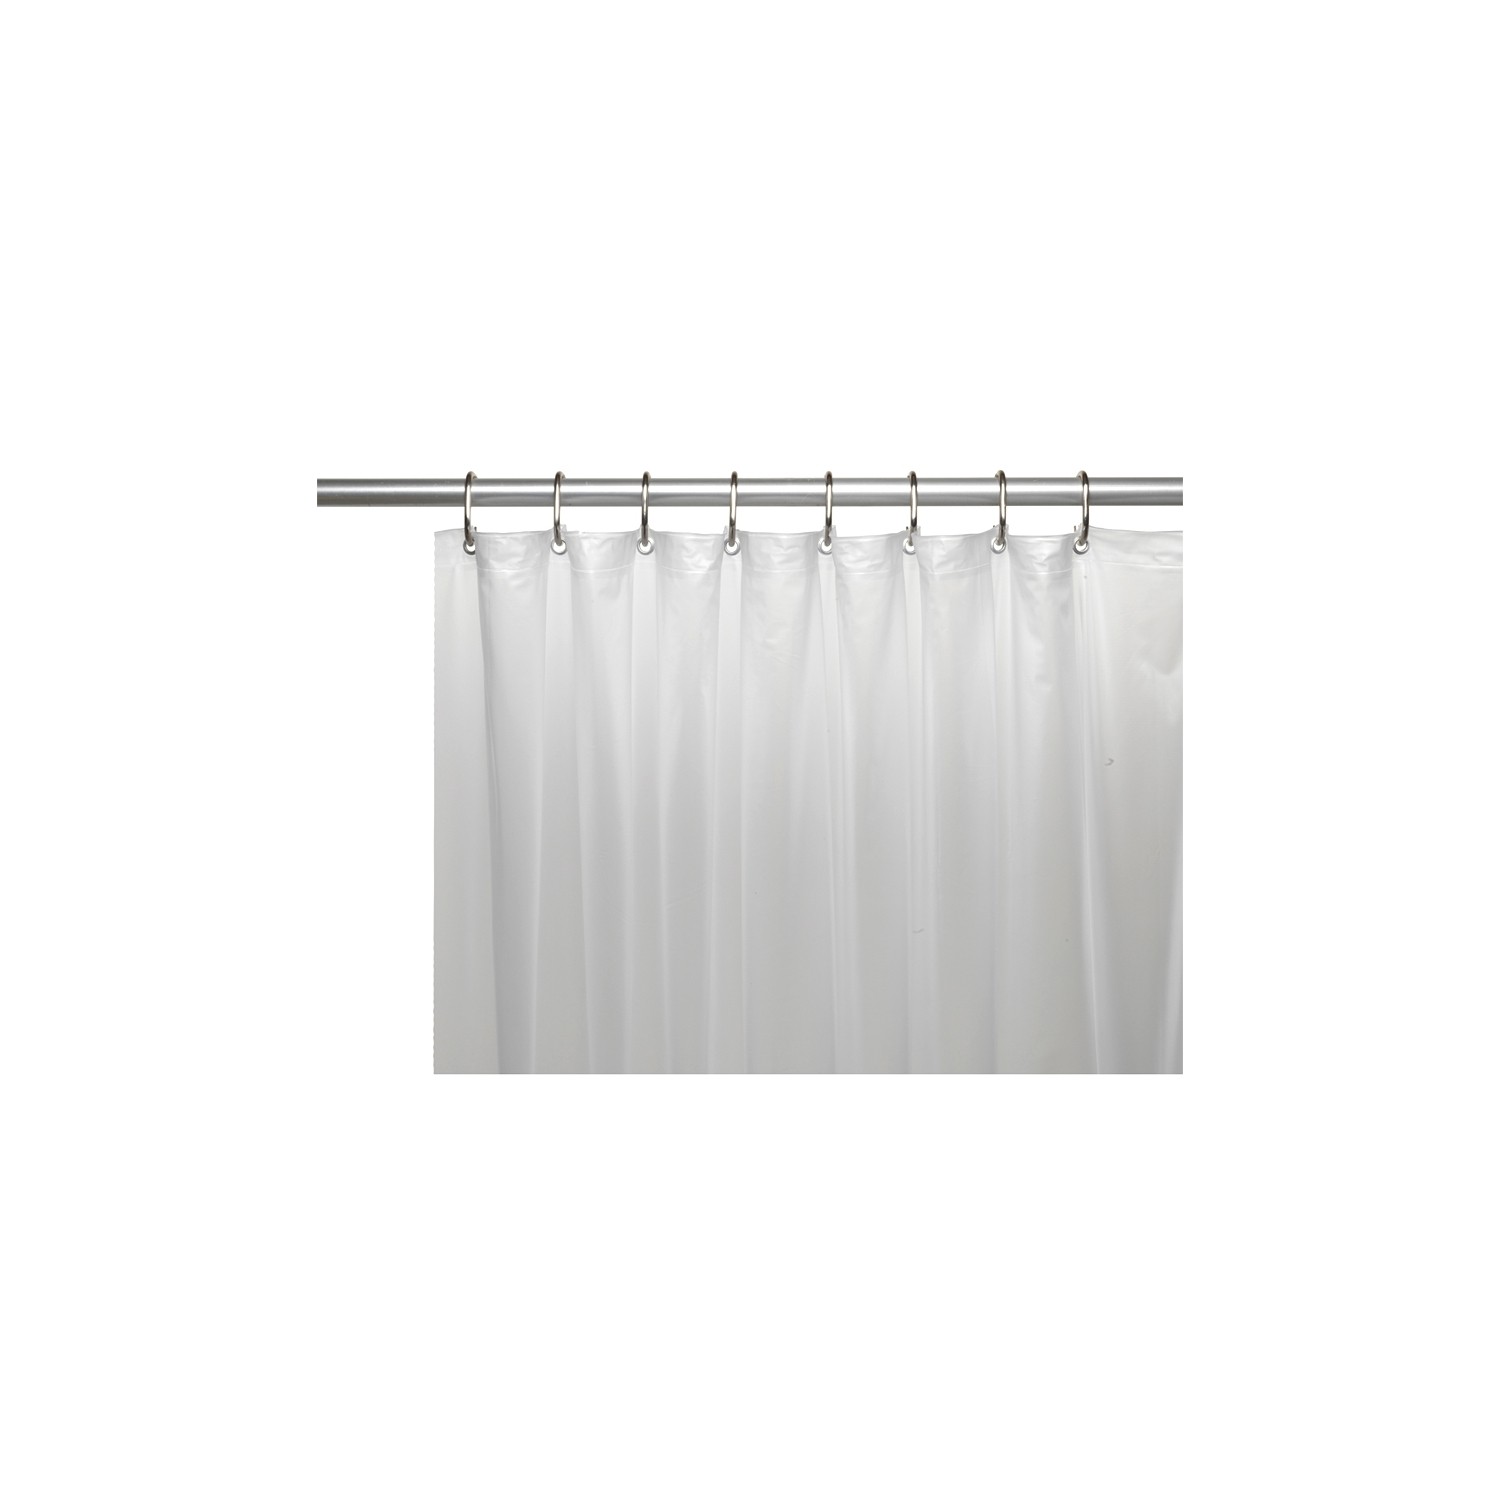 Vinyl Shower Curtain Liner, Extra Long Shower Curtain Liner 84 Clear